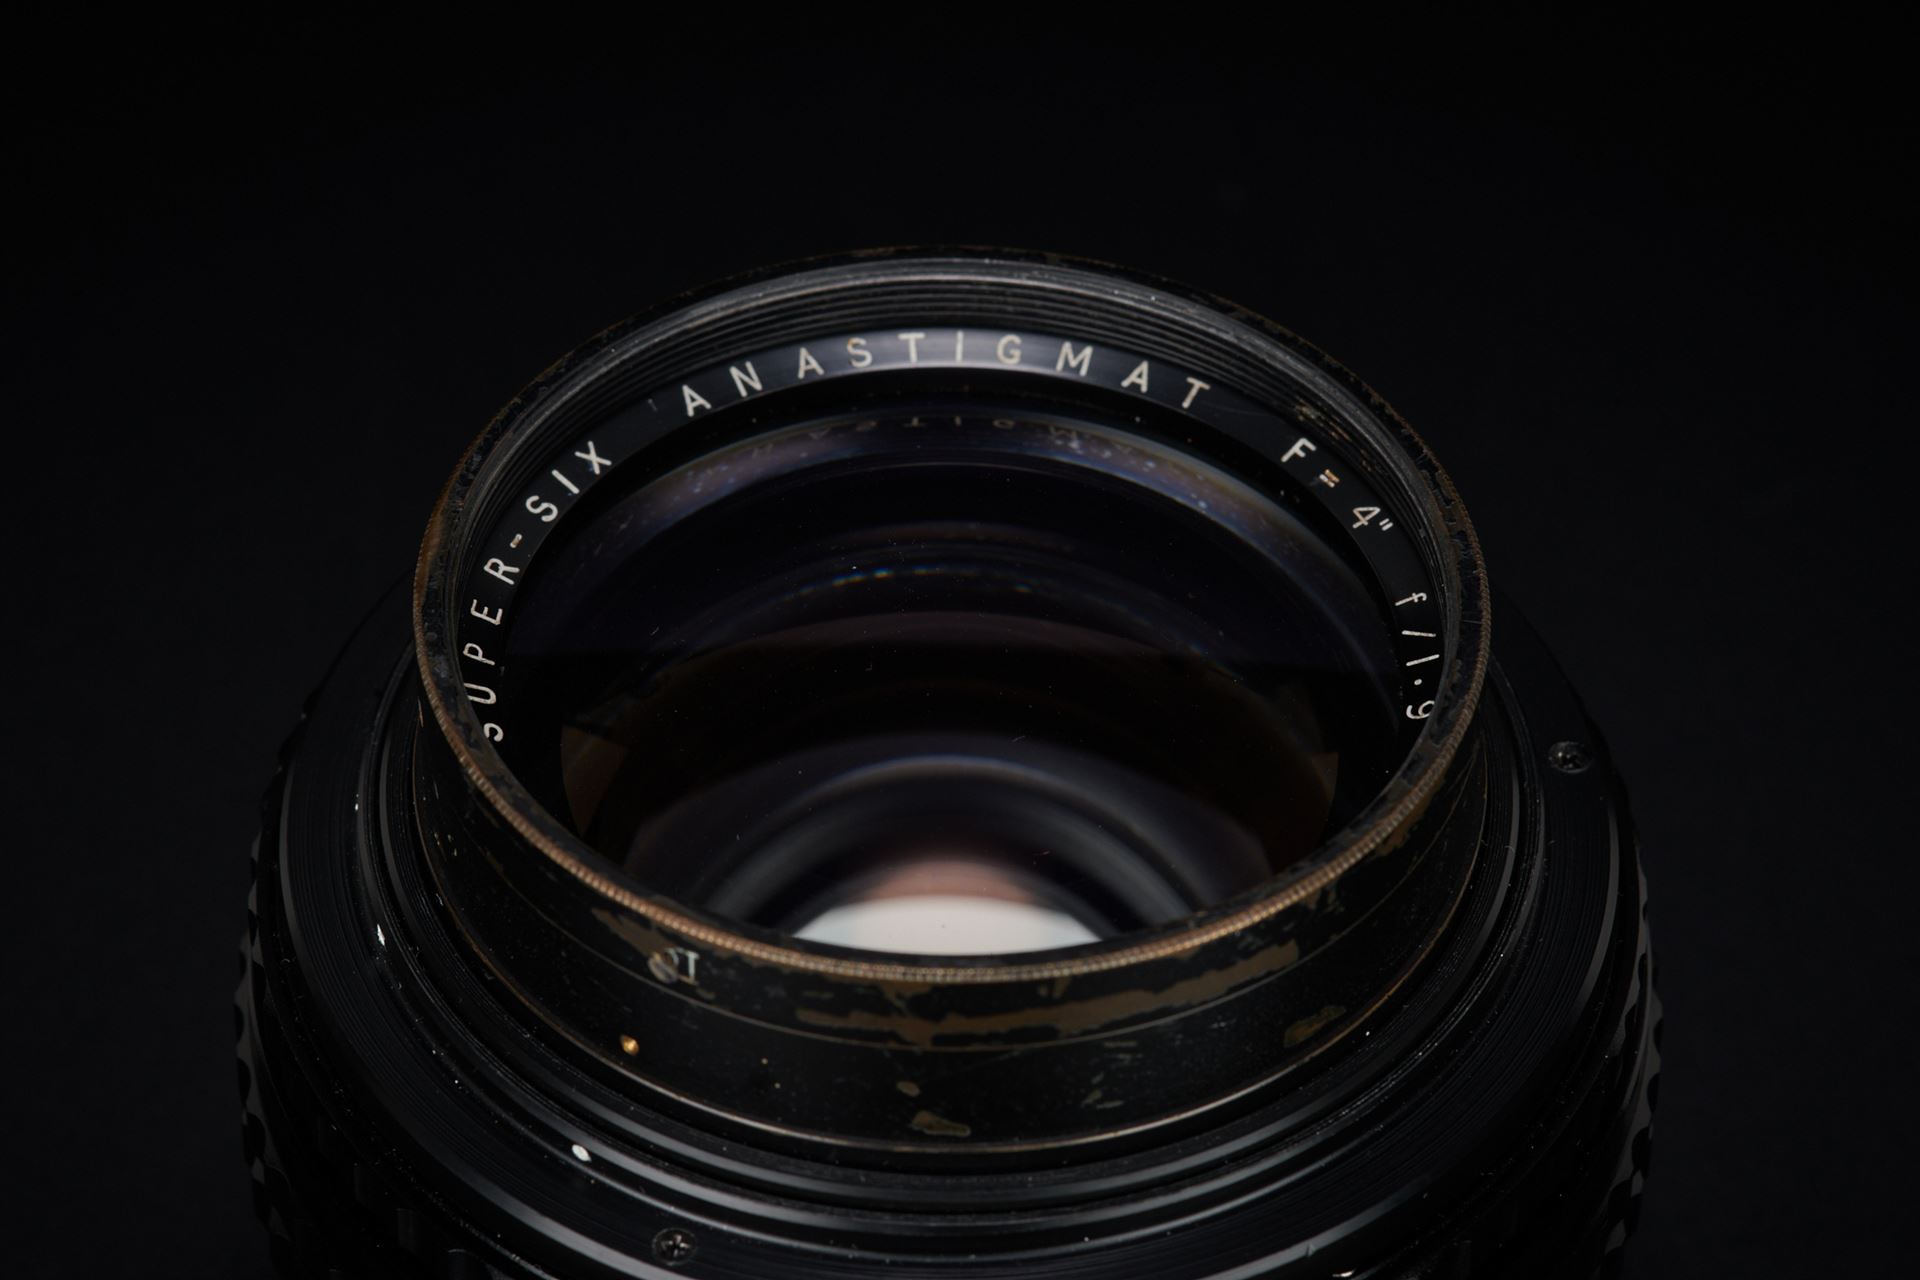 Picture of Dallmeyer Super-Six 4-inch f/1.9 Modified for Hasselblad